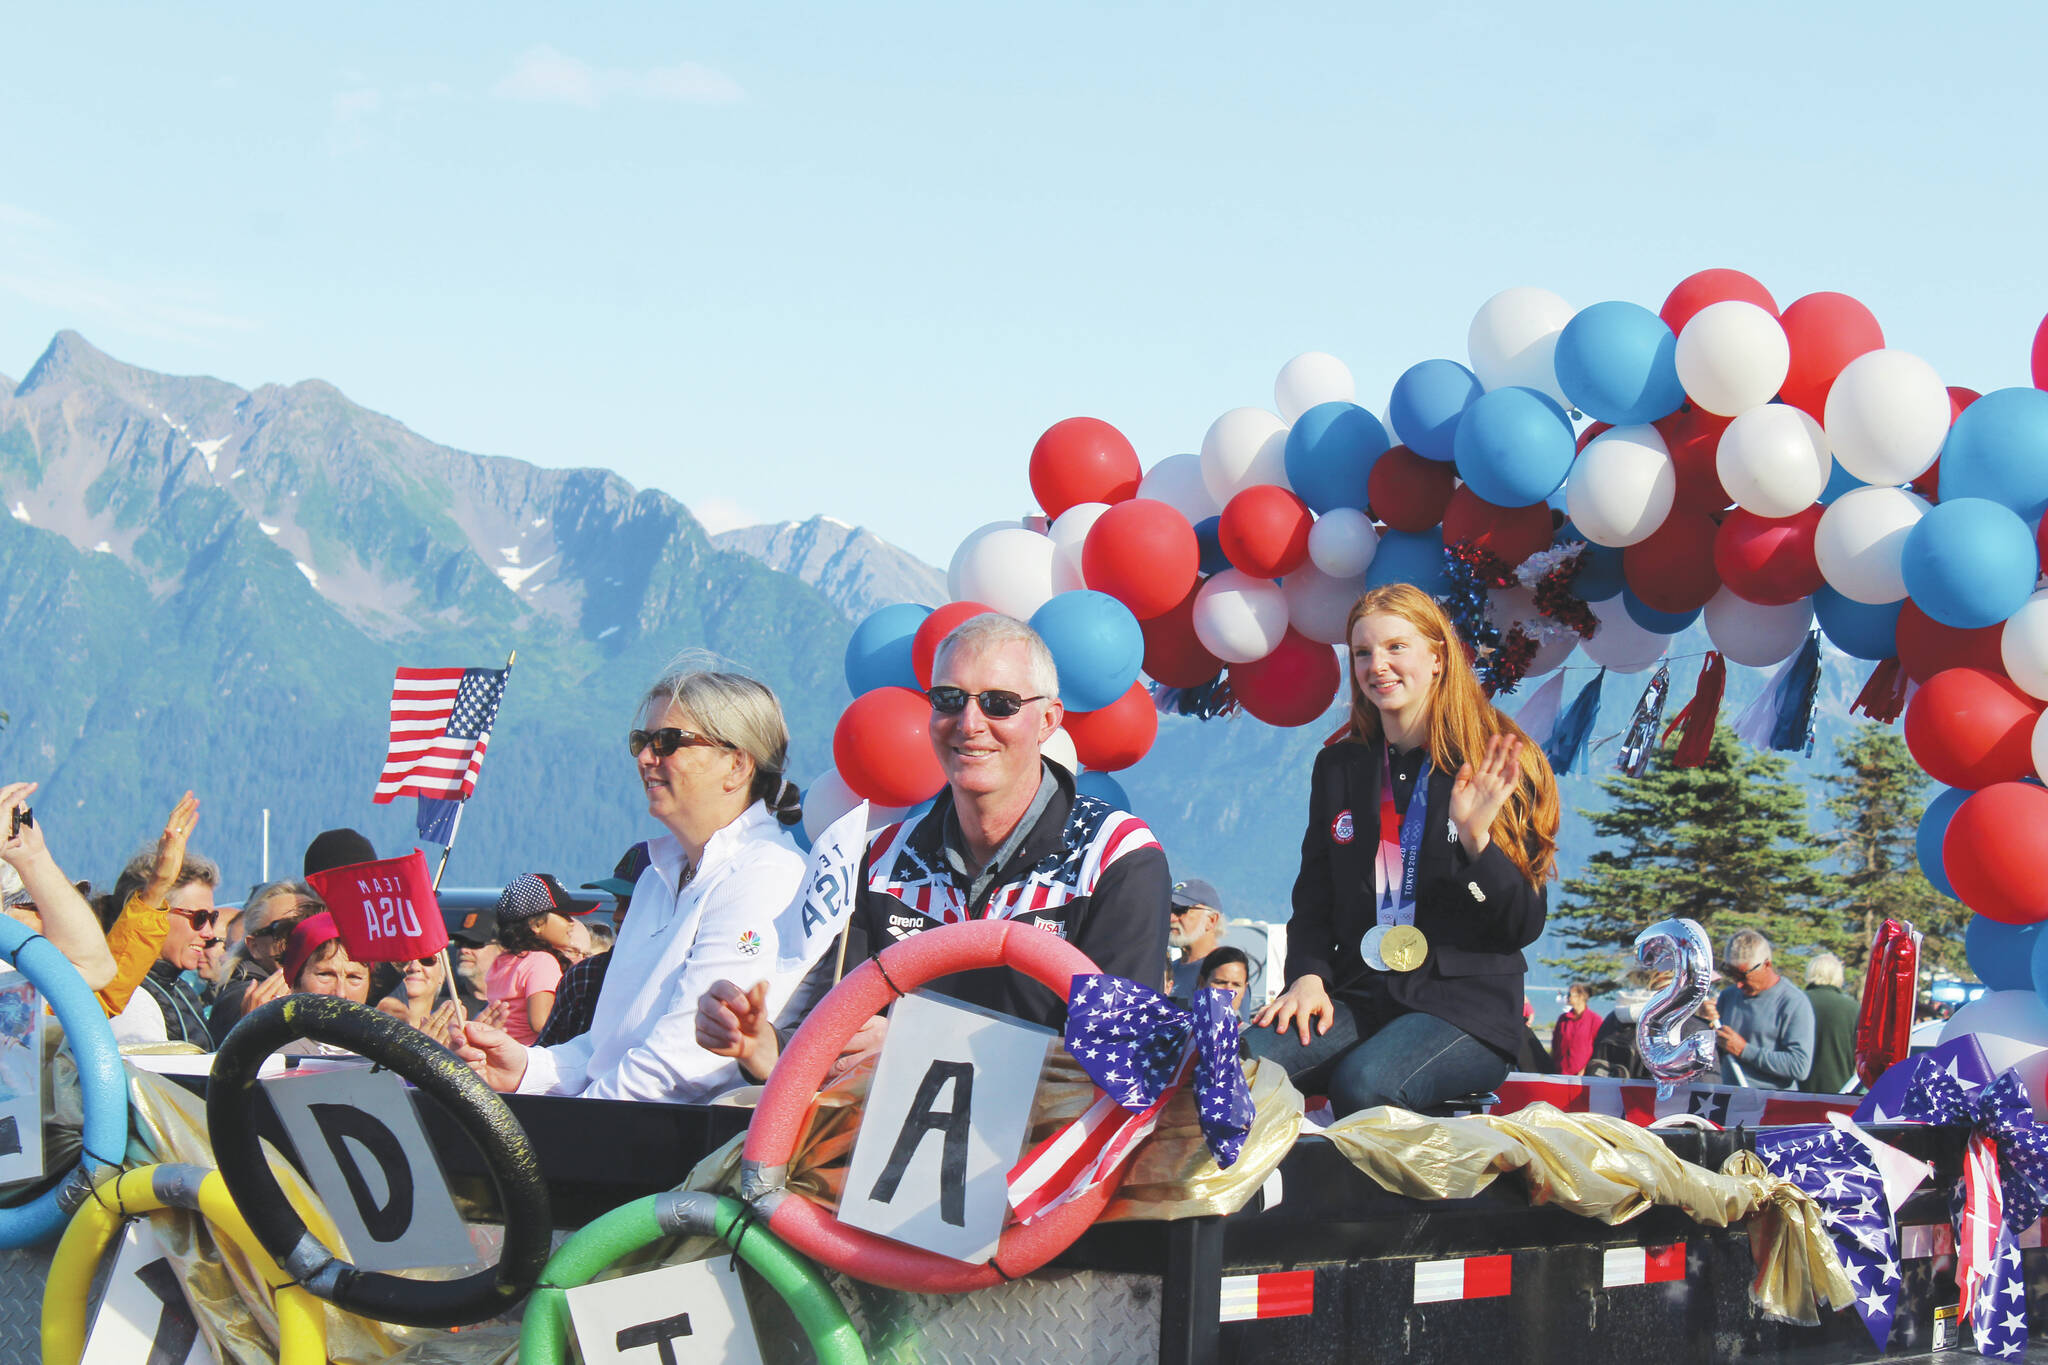 Olympic gold medalist Lydia Jacoby waves to the crowd in Seward during her celebratory parade on Thursday, August 5, 2021. (Ashlyn O’Hara/Peninsula Clarion)